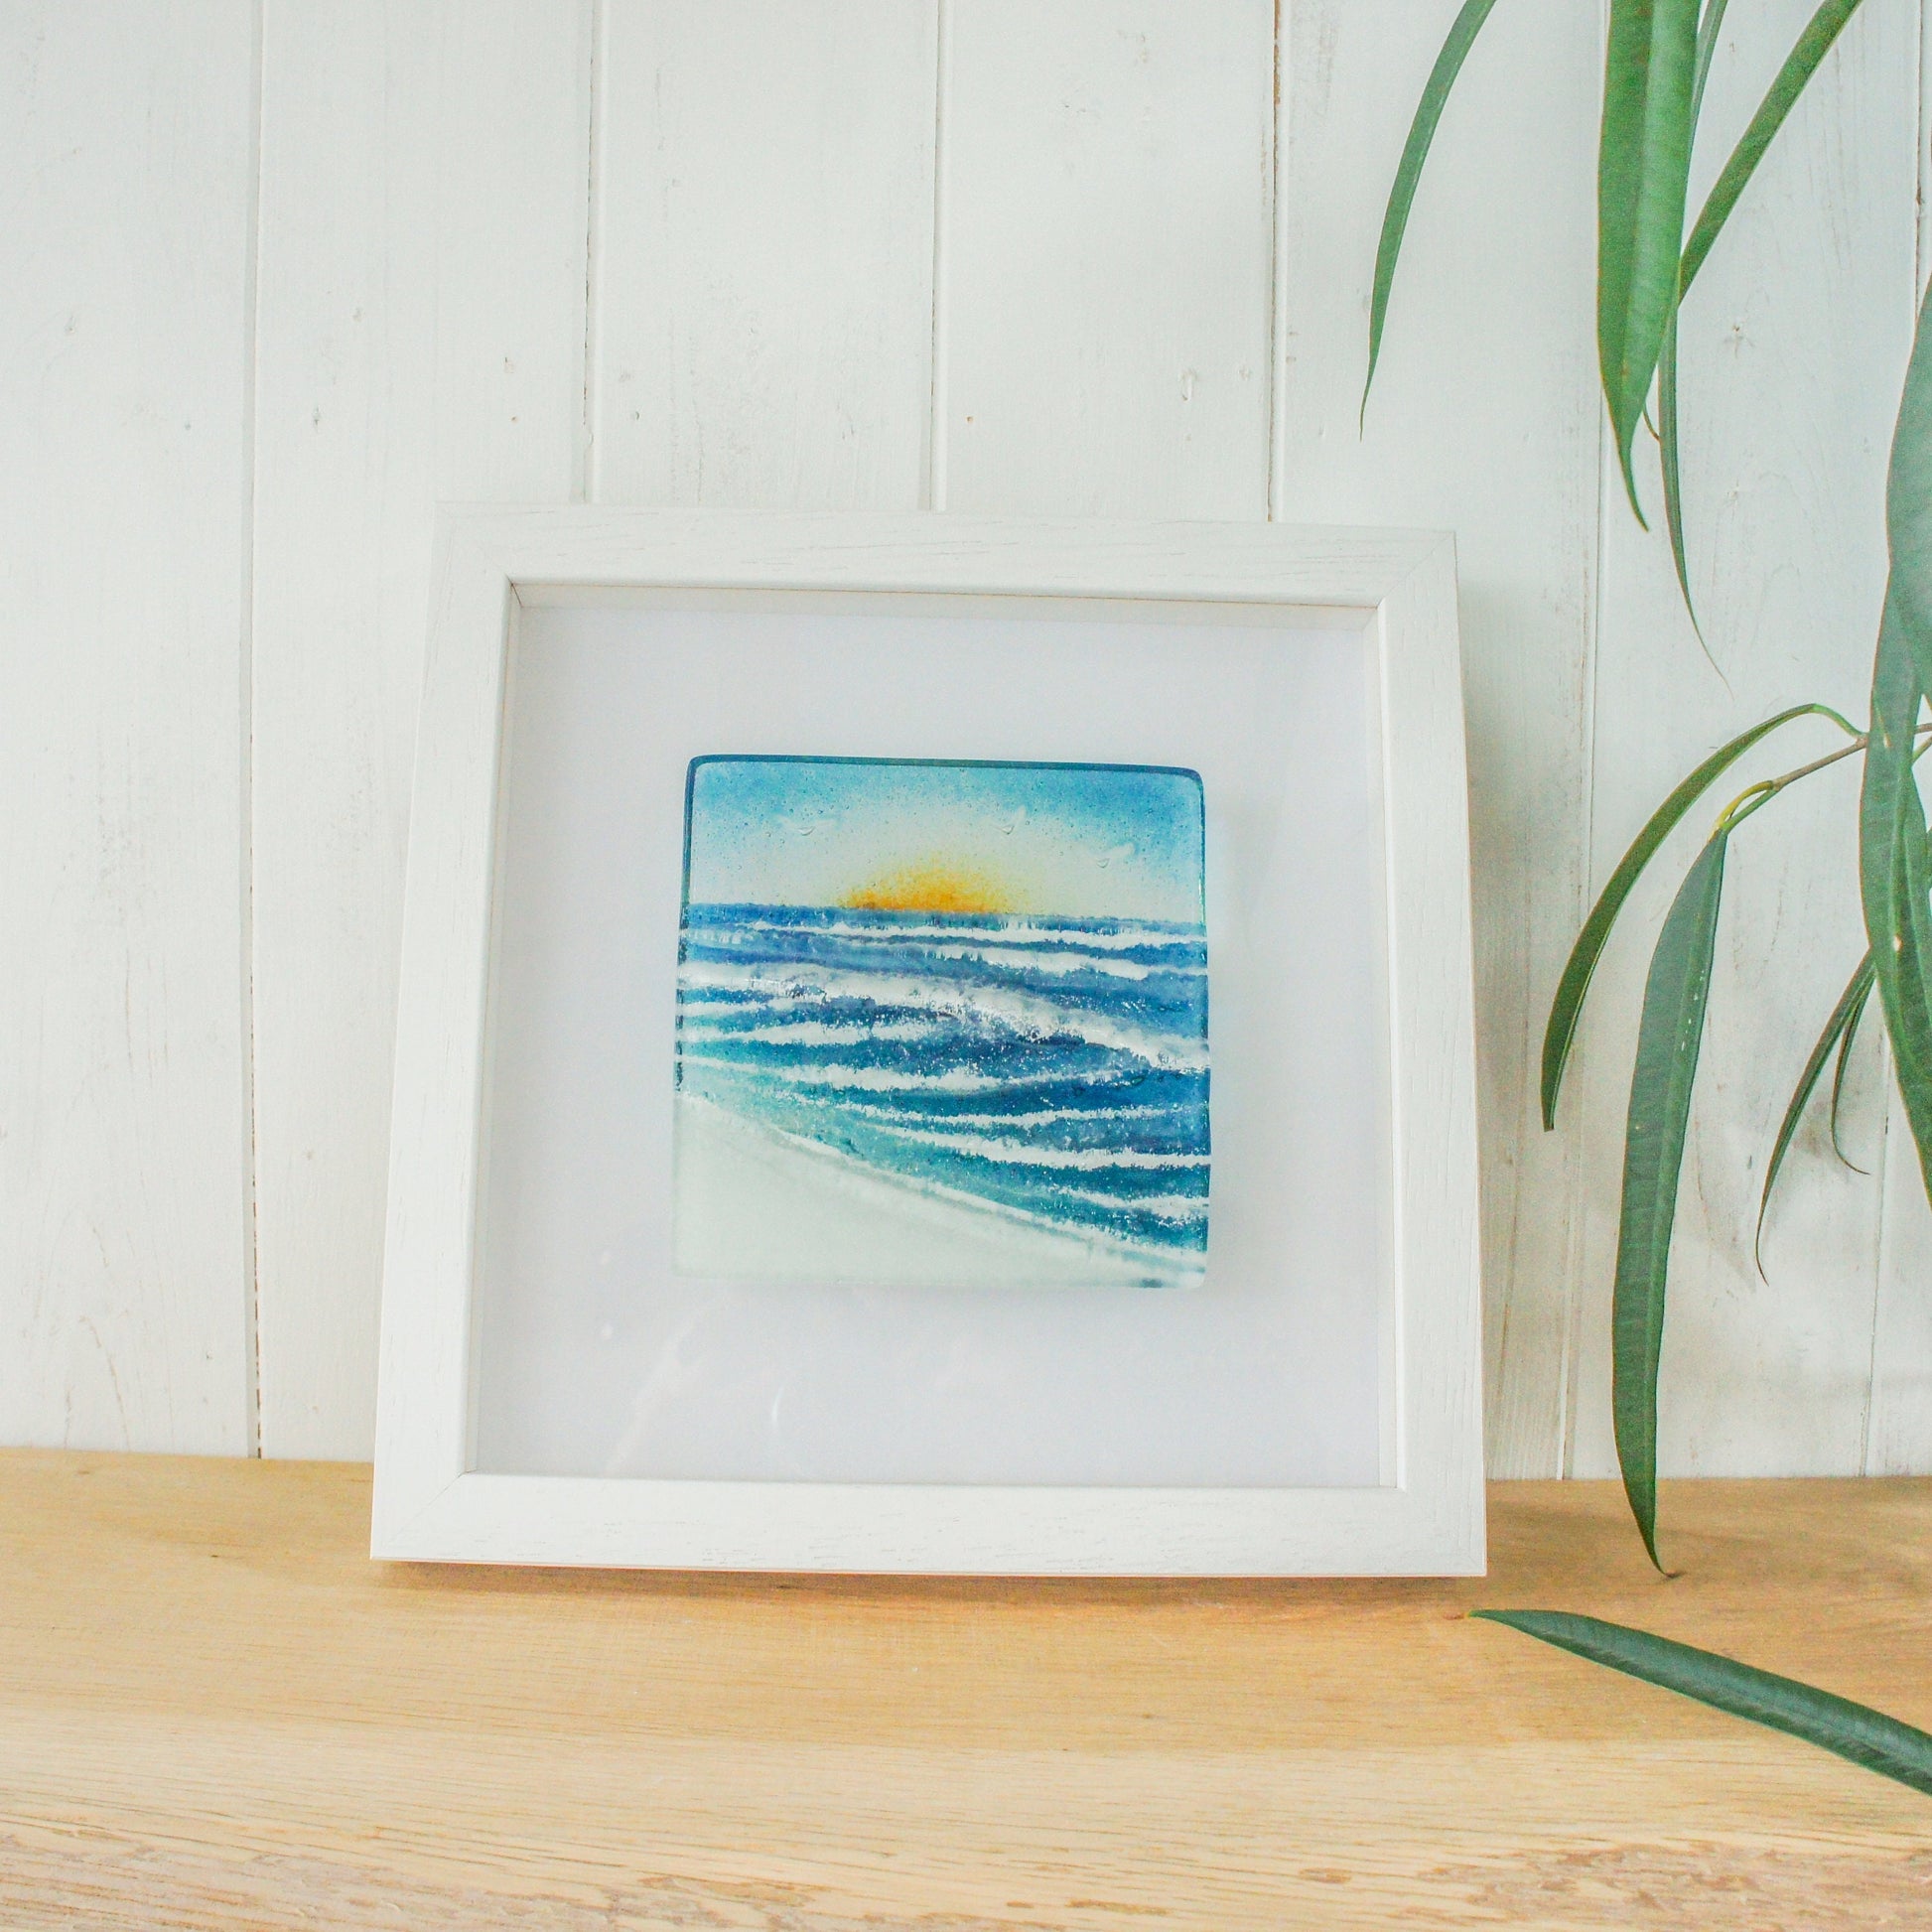 Wave in a Box Fused Glass Wave Wall Art Sun 25x25cm(10"), Turquoise Teal Blue Seaside Glass Framed Picture, Surfer's Wave Wall Sculpture